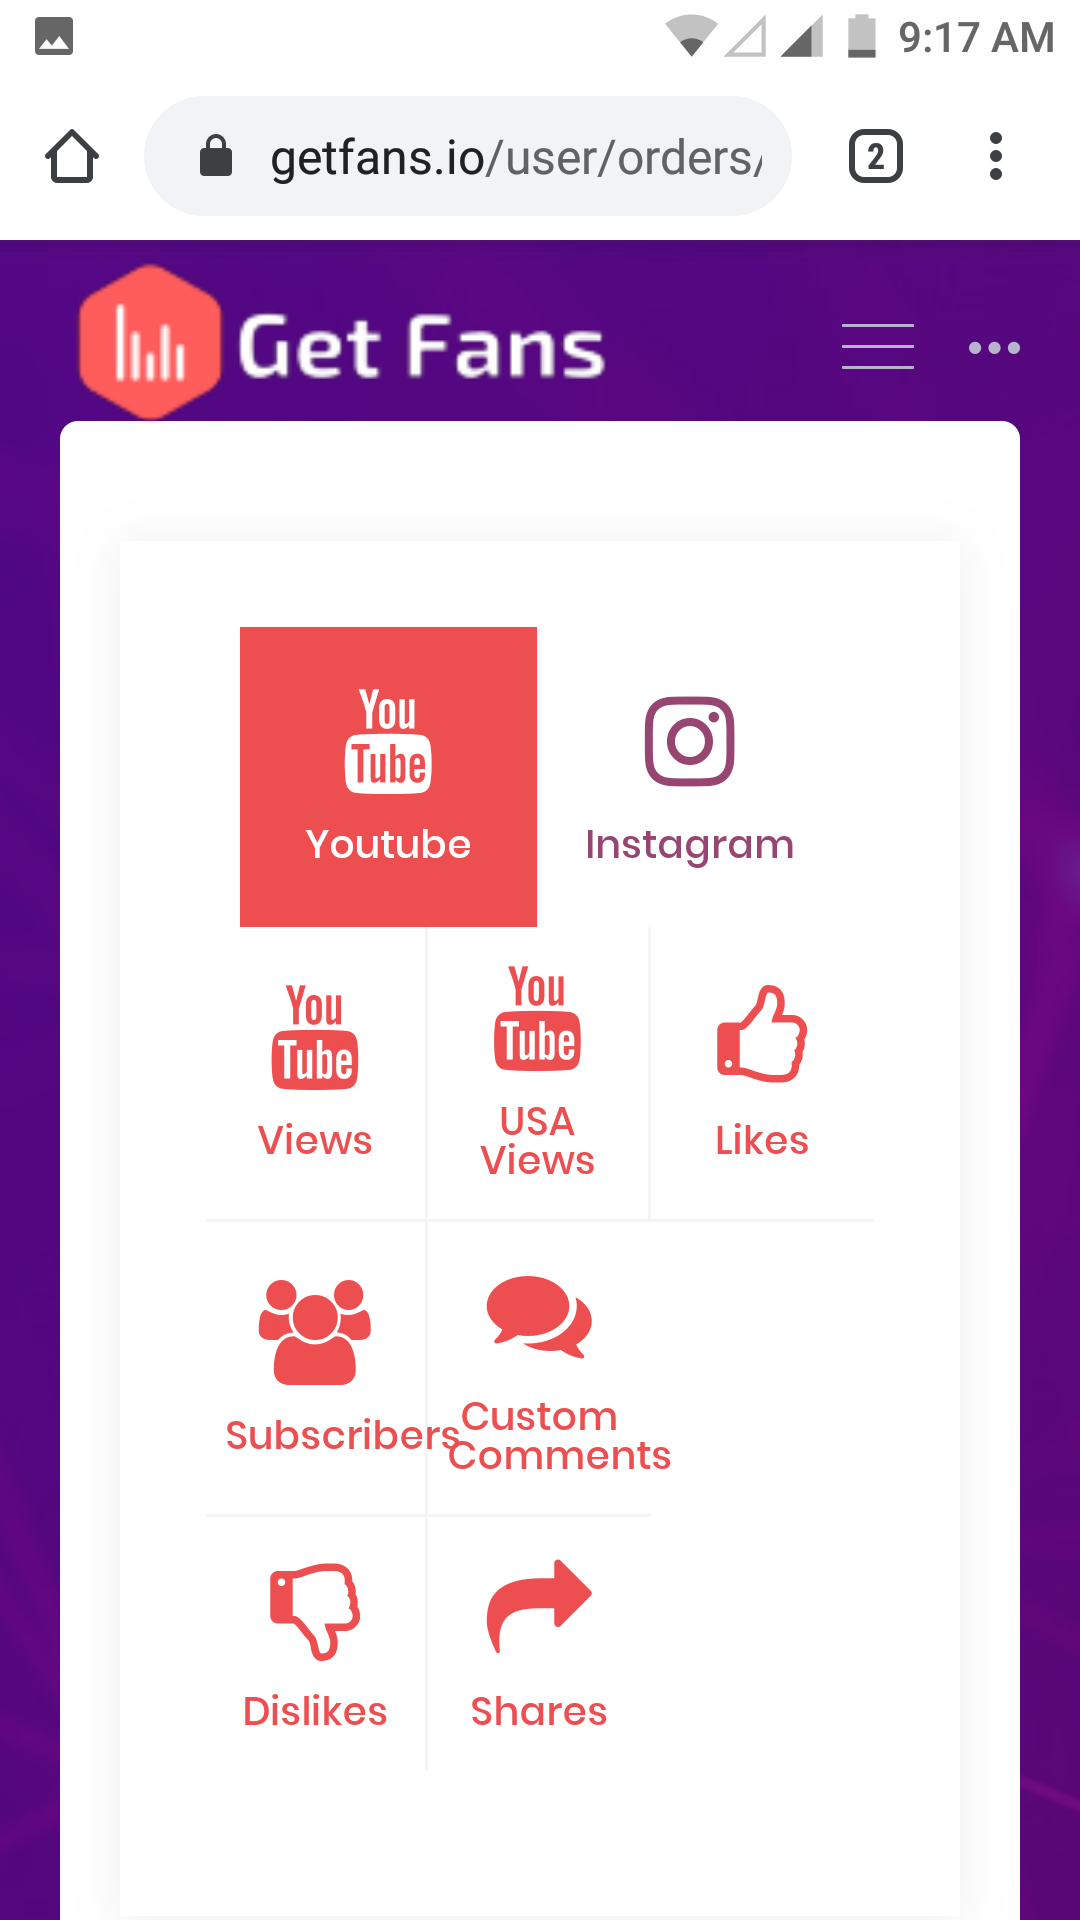 All YouTube Services on GetFans.io